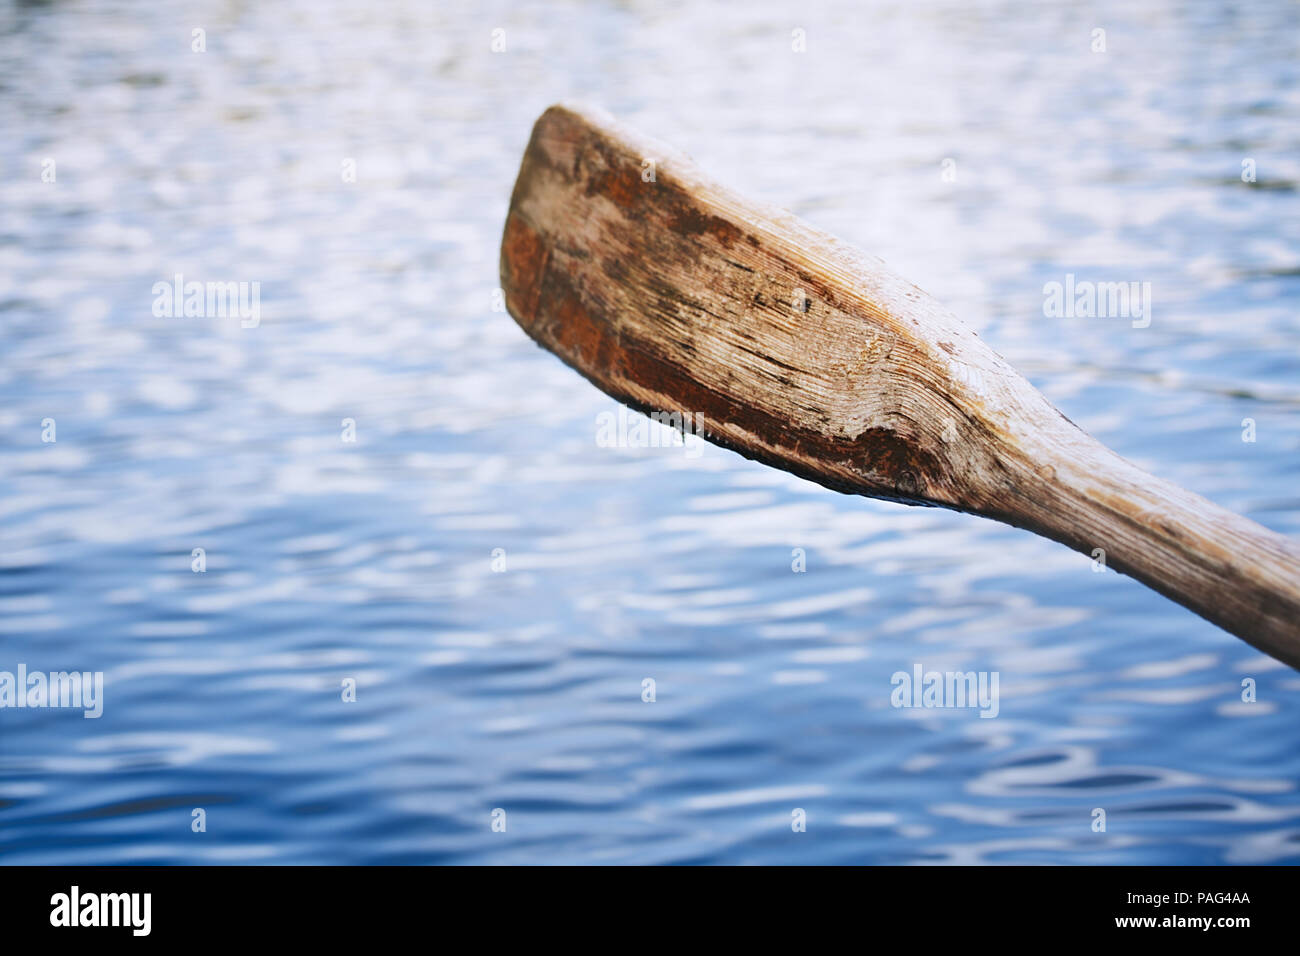 a close up of an old padle with visible wooden structure Stock Photo